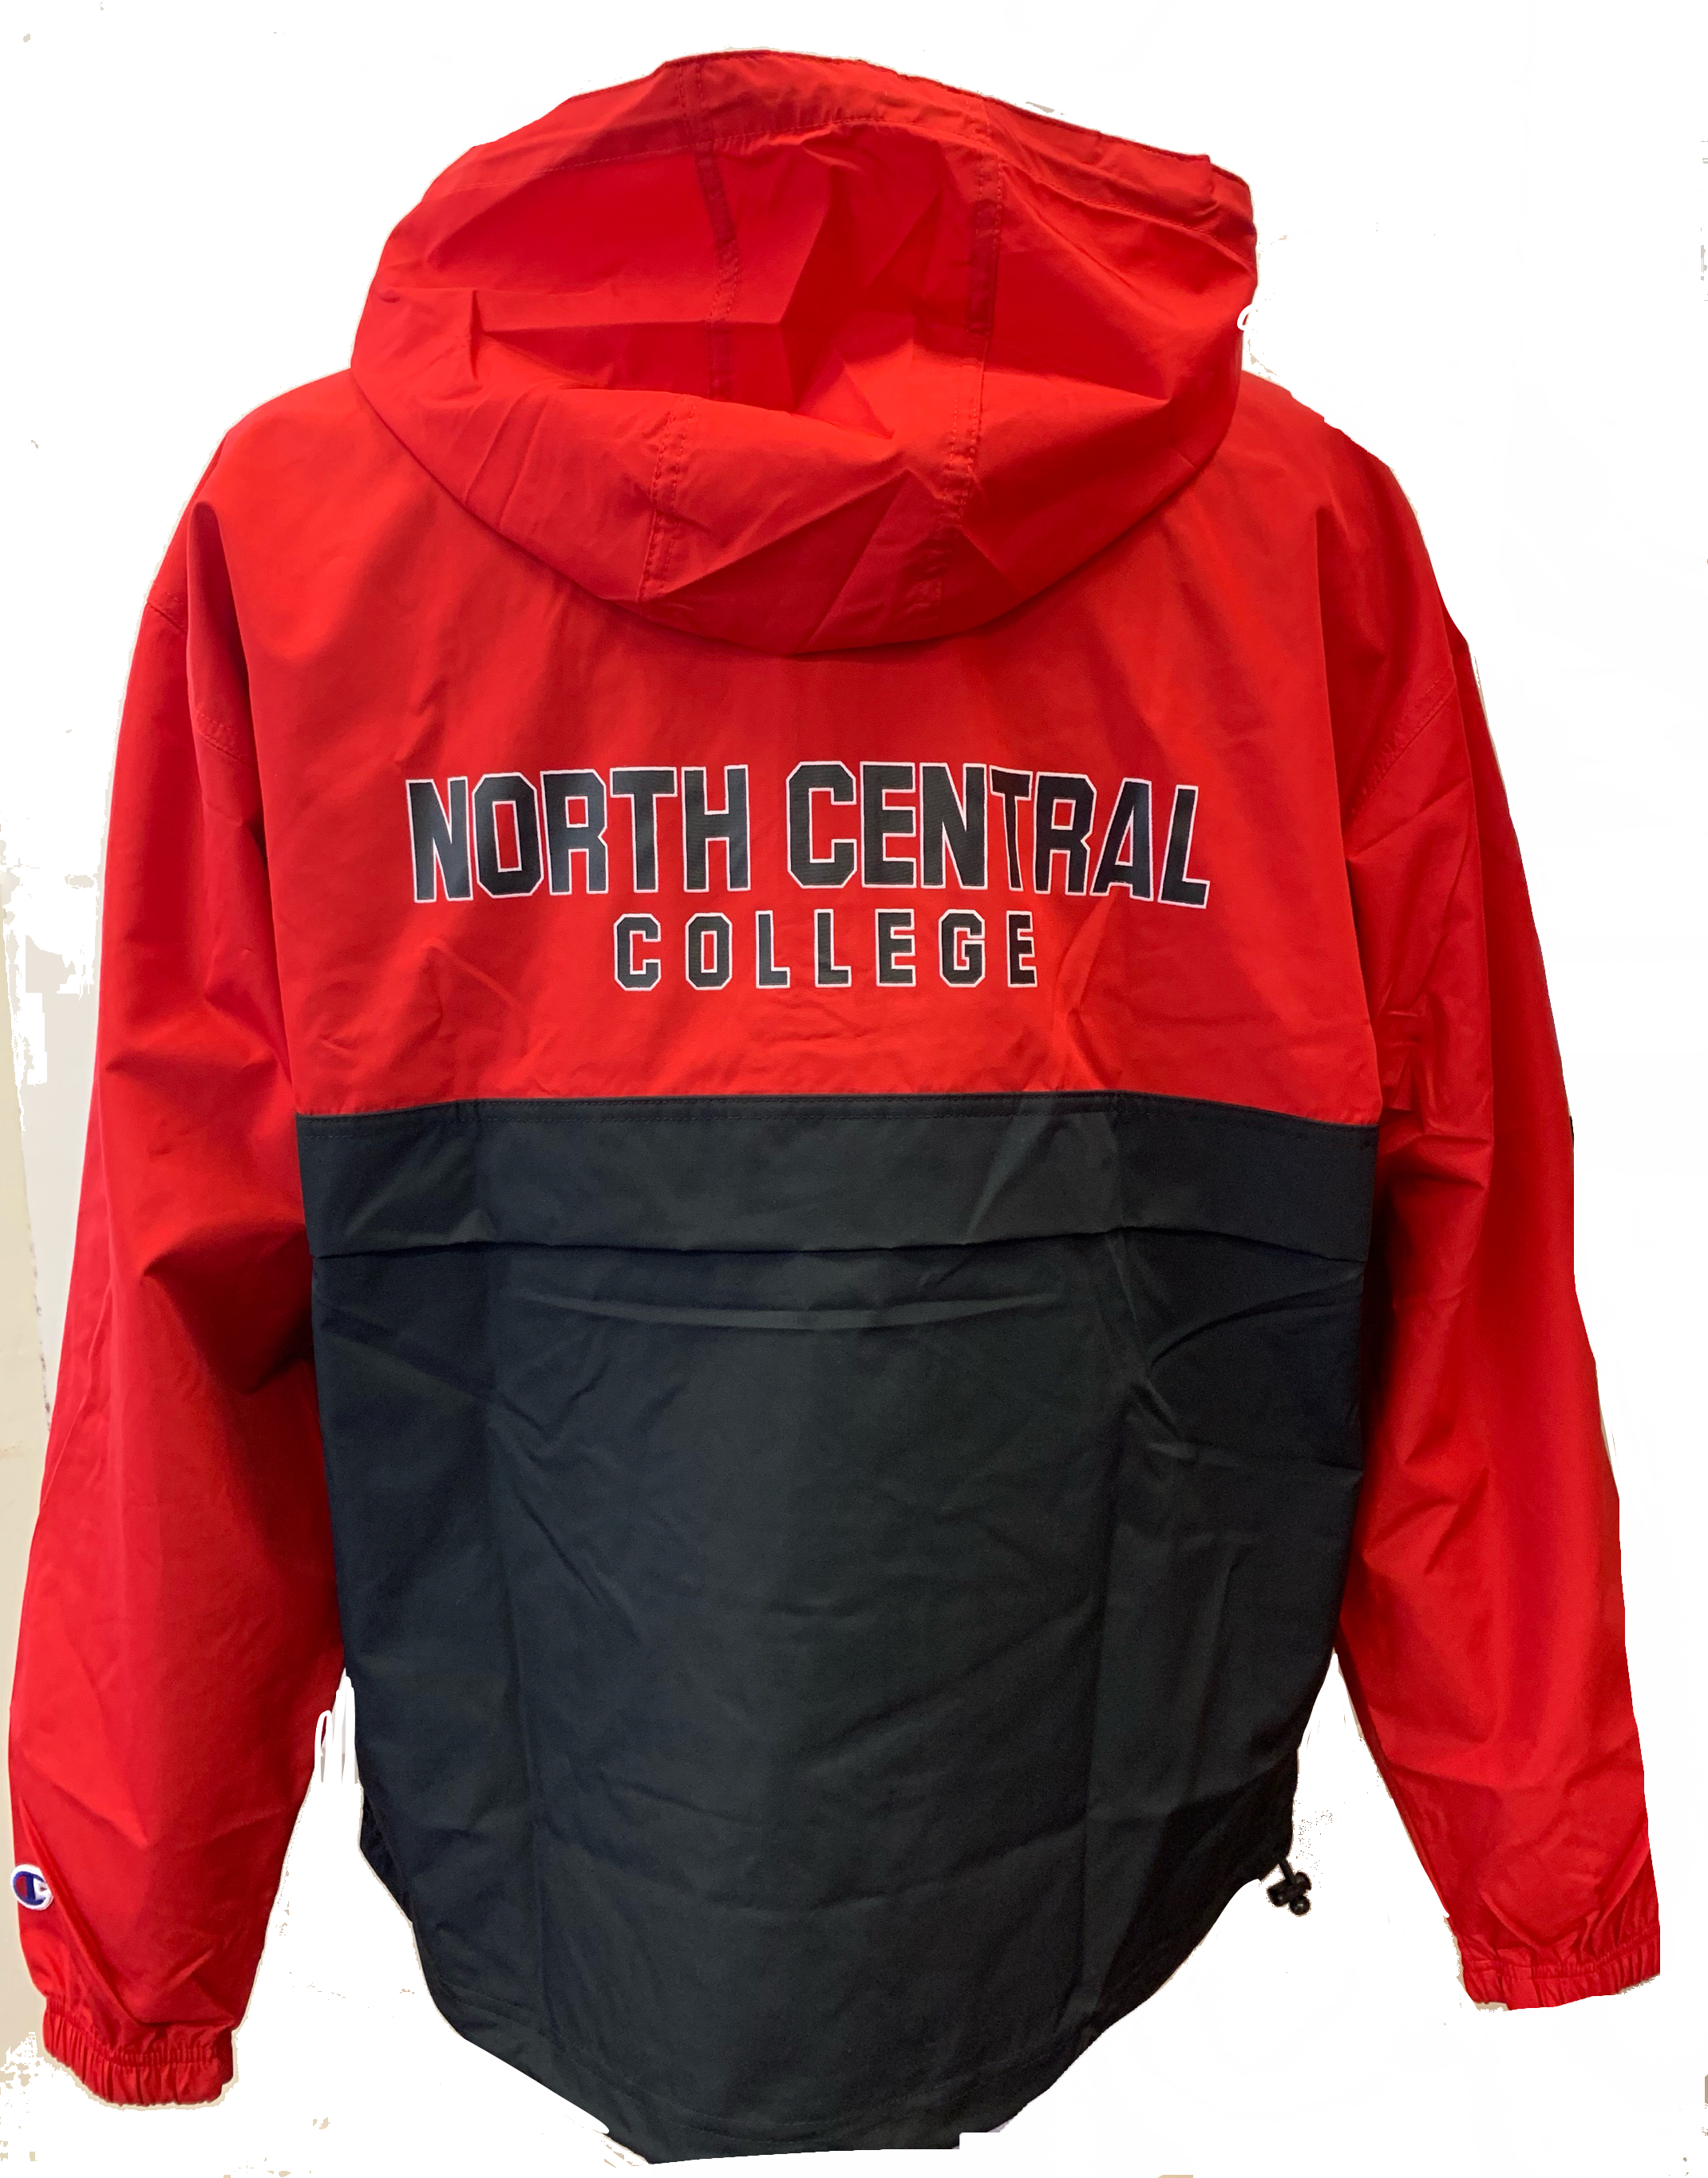 red champion packable jacket